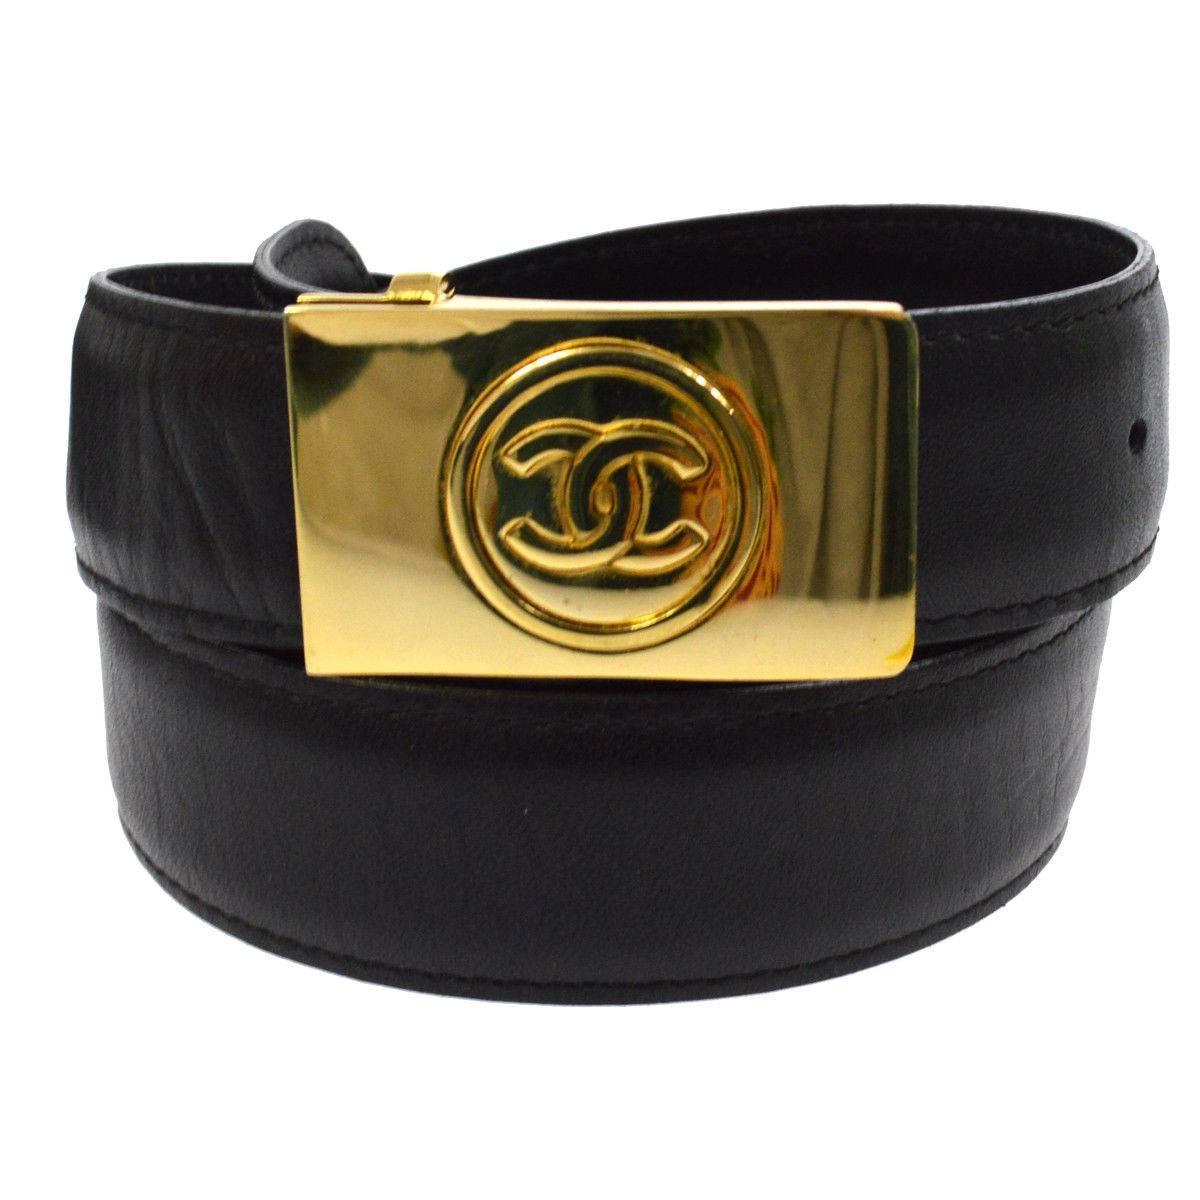 Chanel Black Leather Gold Buckle Charm Evening Waist Belt in Box